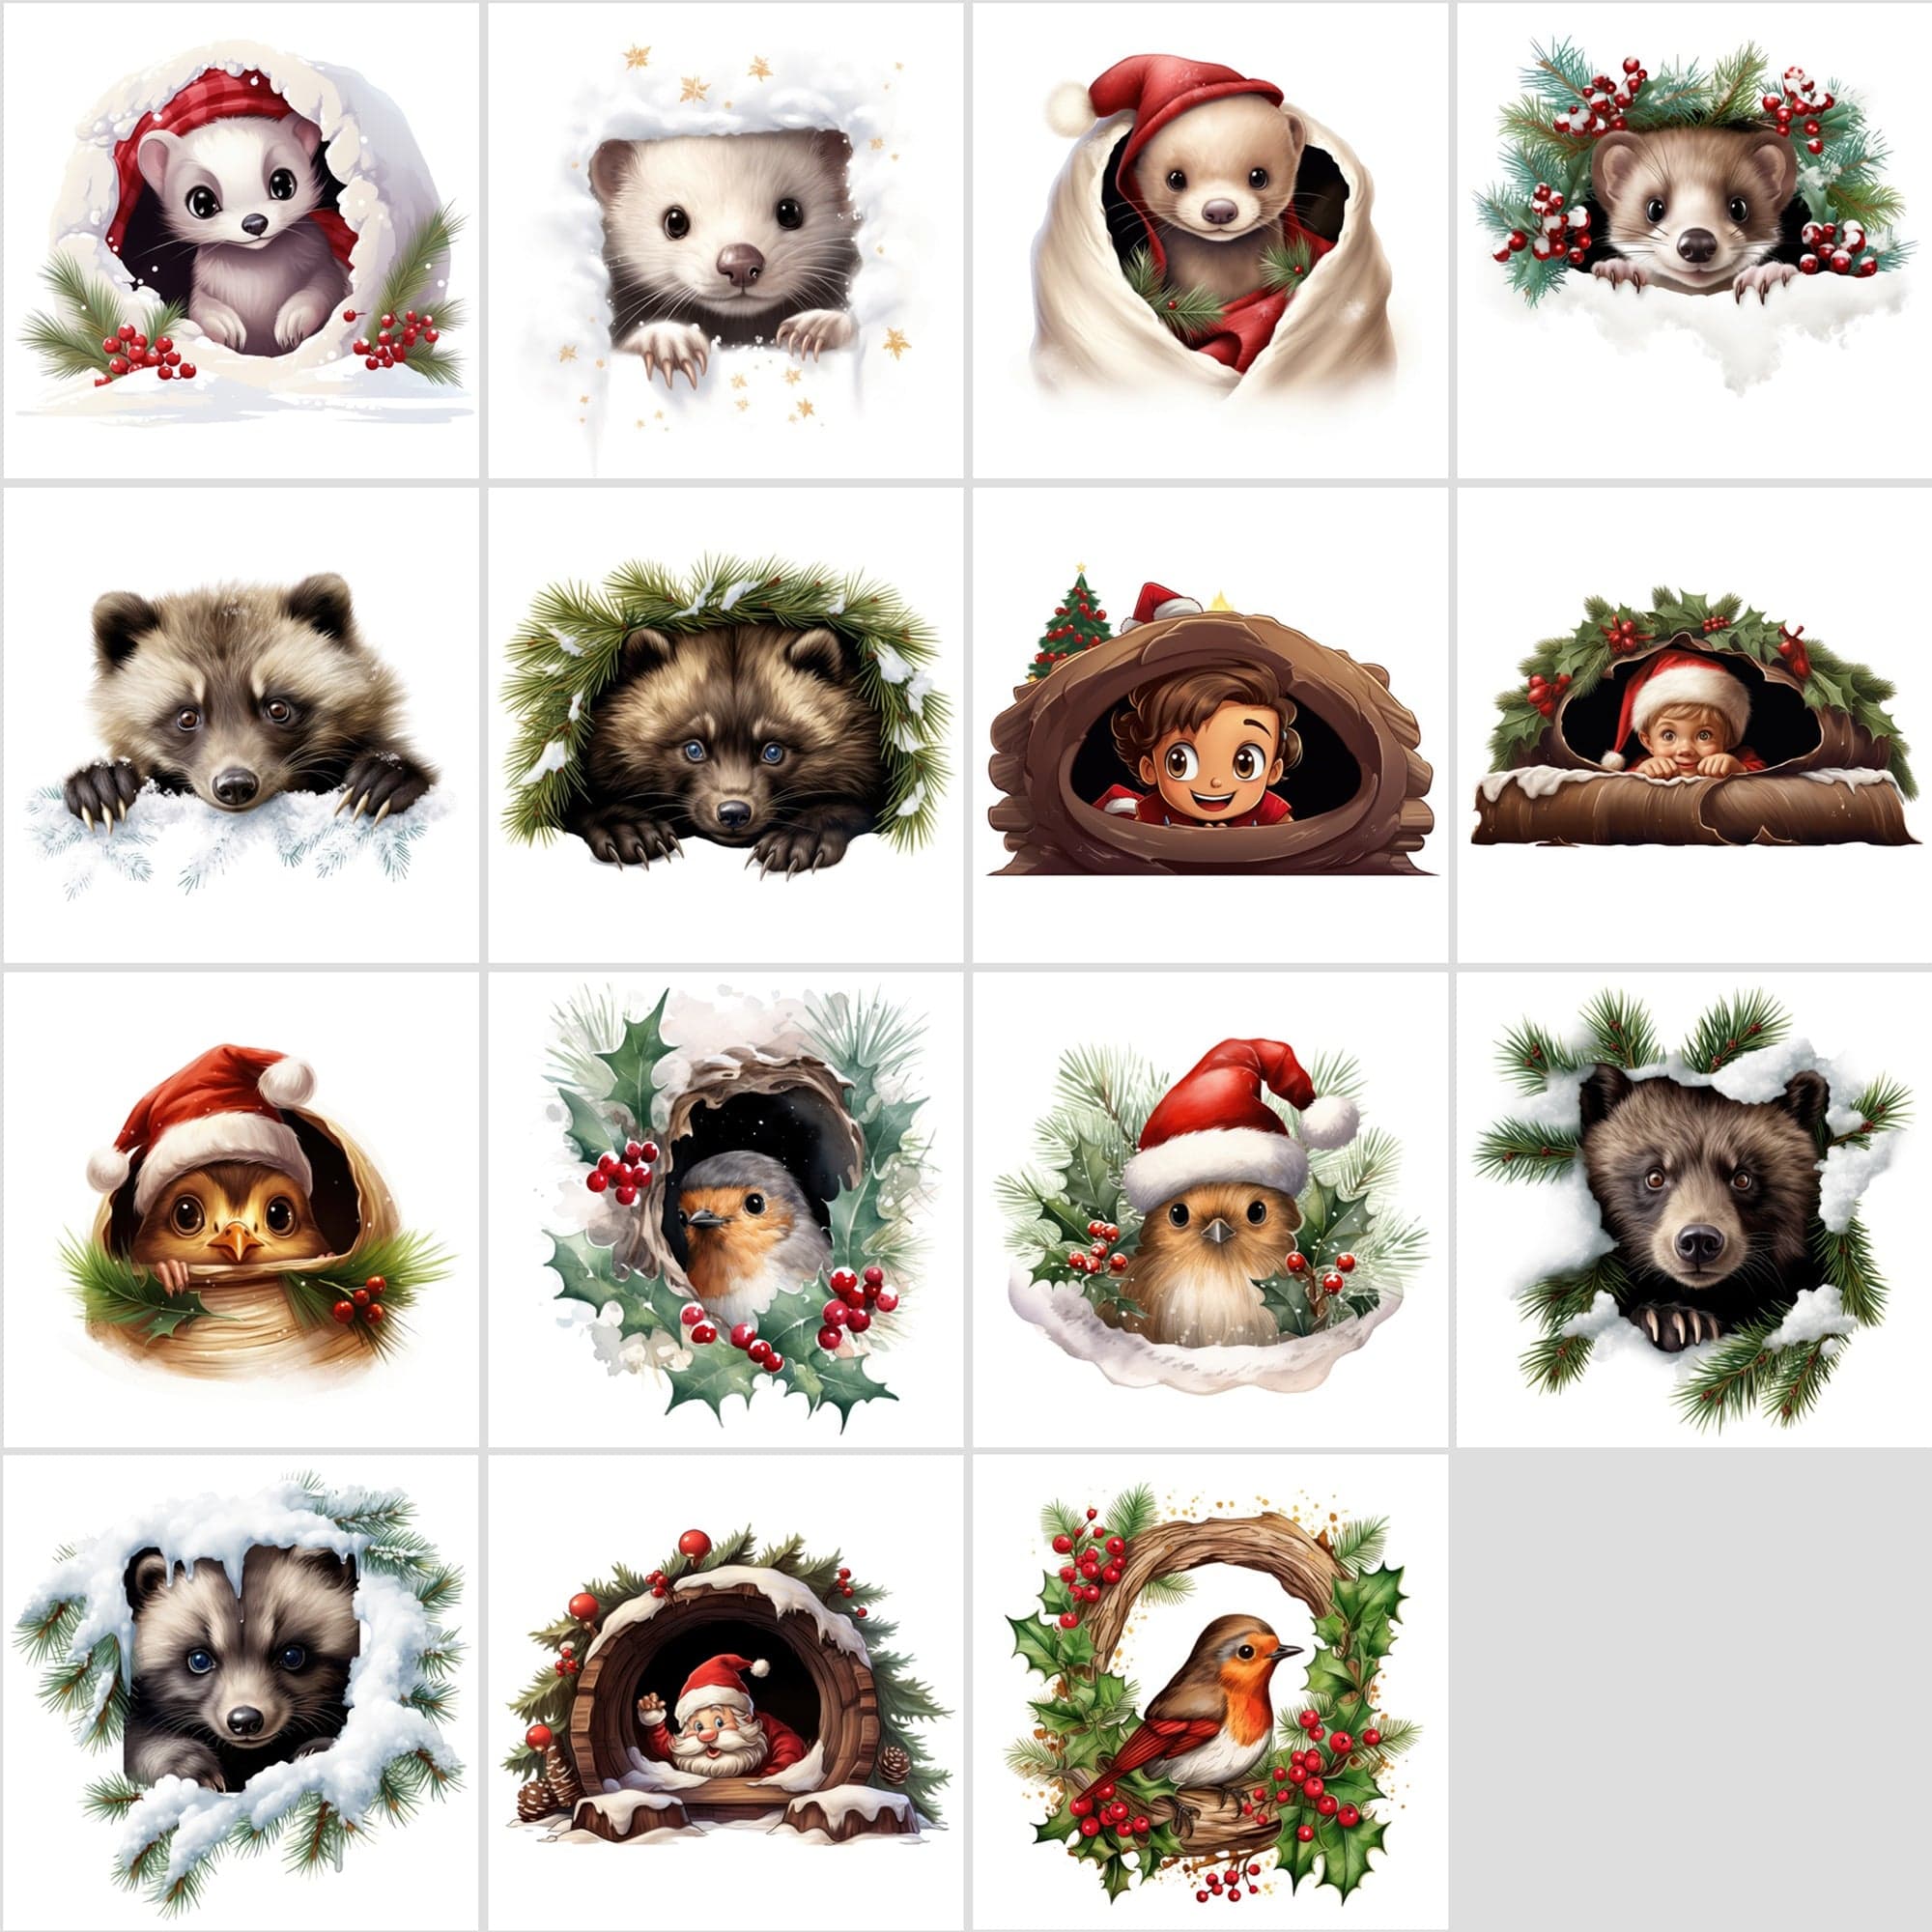 Whimsical Peekaboo Animals in Snow PNG Collection - Vibrant Christmas Themed Digital Images with Commercial Use License Digital Download Sumobundle